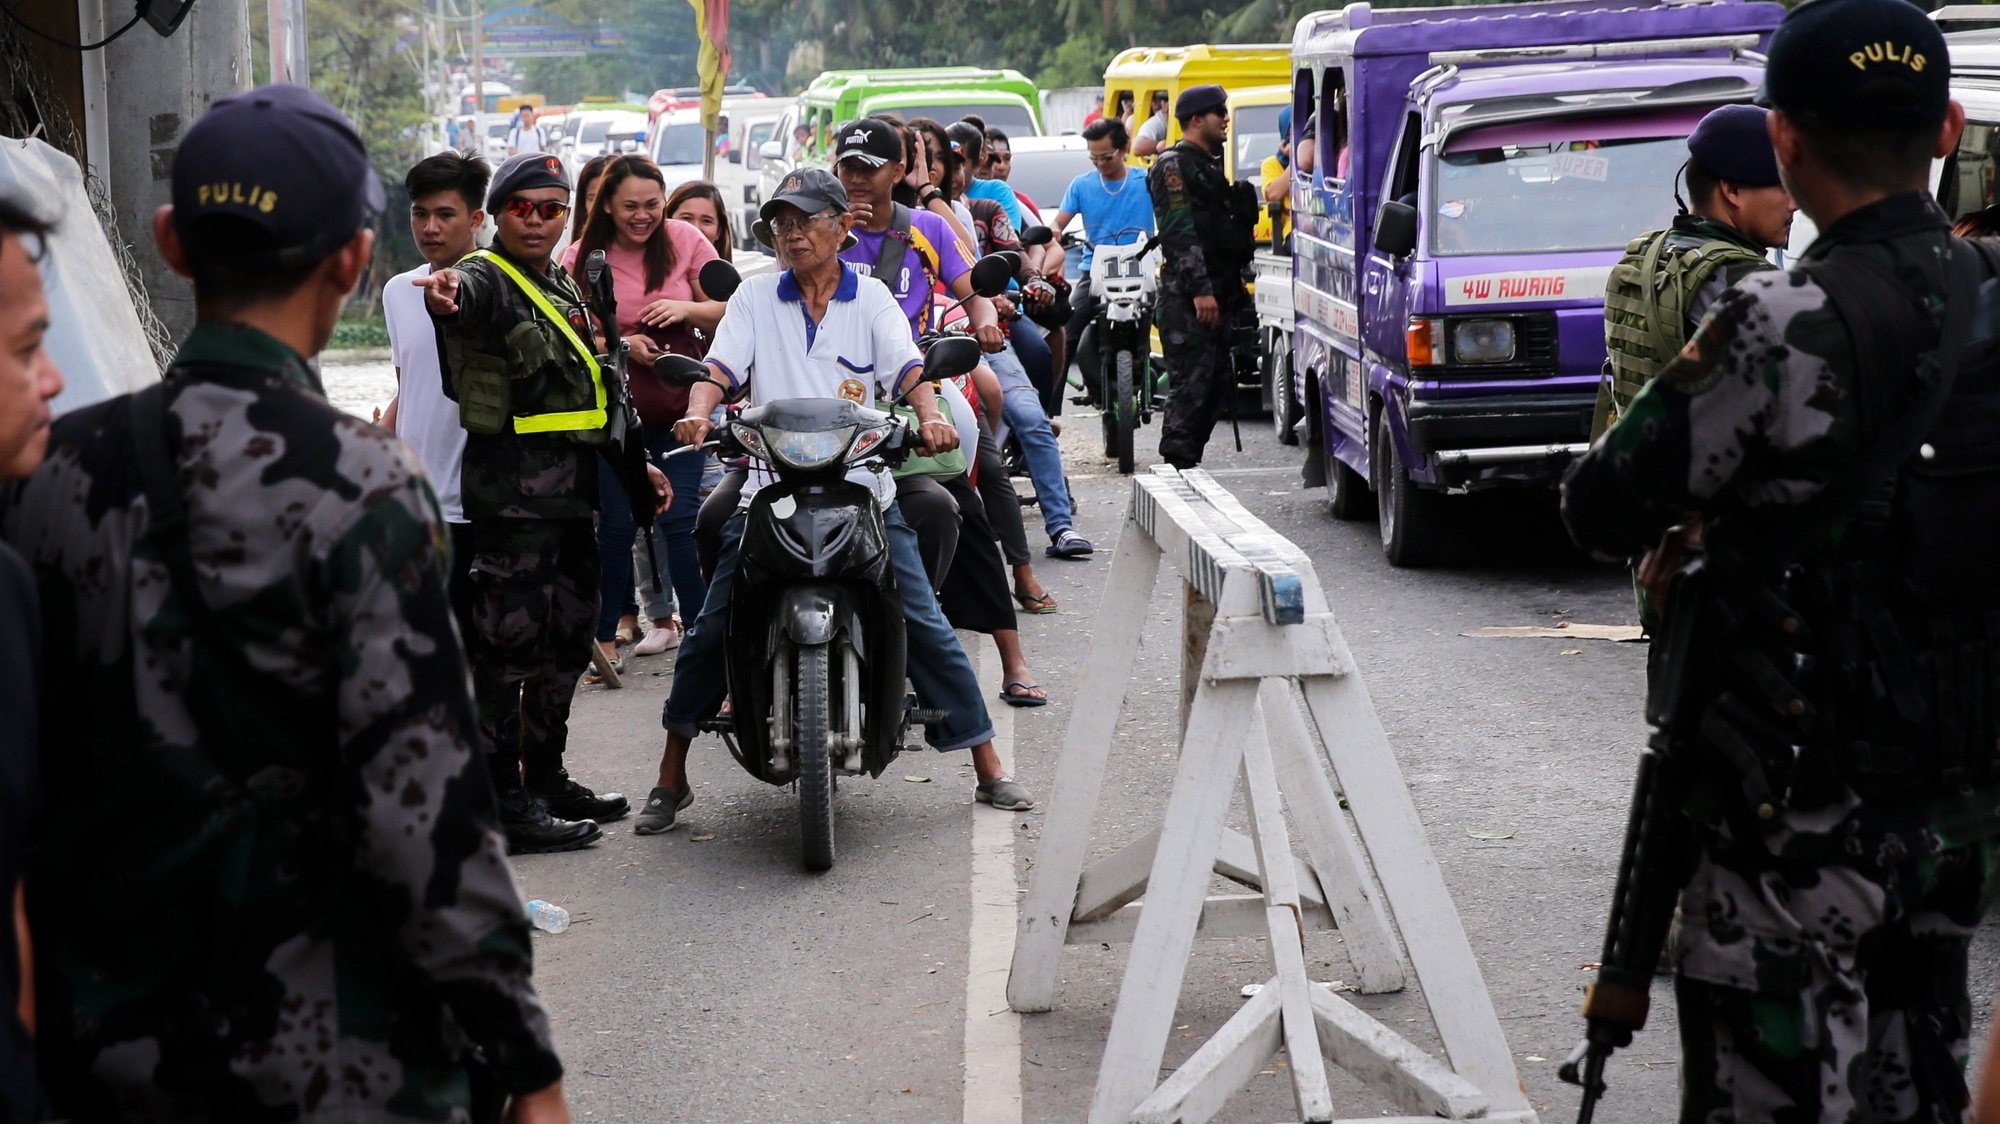 epa07302610 Motorists are inspected at a checkpoint area in Cotabato, southern Philippines, 20 January 2019. According to reports, over two million people in the Muslim provinces of Basilan, Sulu, Tawu-Tawi, Maguindanao and Lanao del Sur are expected to join a plebiscite, on 21 January, to ratify the passage of the Bangsamoro Organic Law (BOL). The law aims to give Muslims in the southern Philippines full control of the autonomous region, where they will be allowed to form an elected parliament and administration in Islamic-majority areas.  EPA/MARK R. CRISTINO